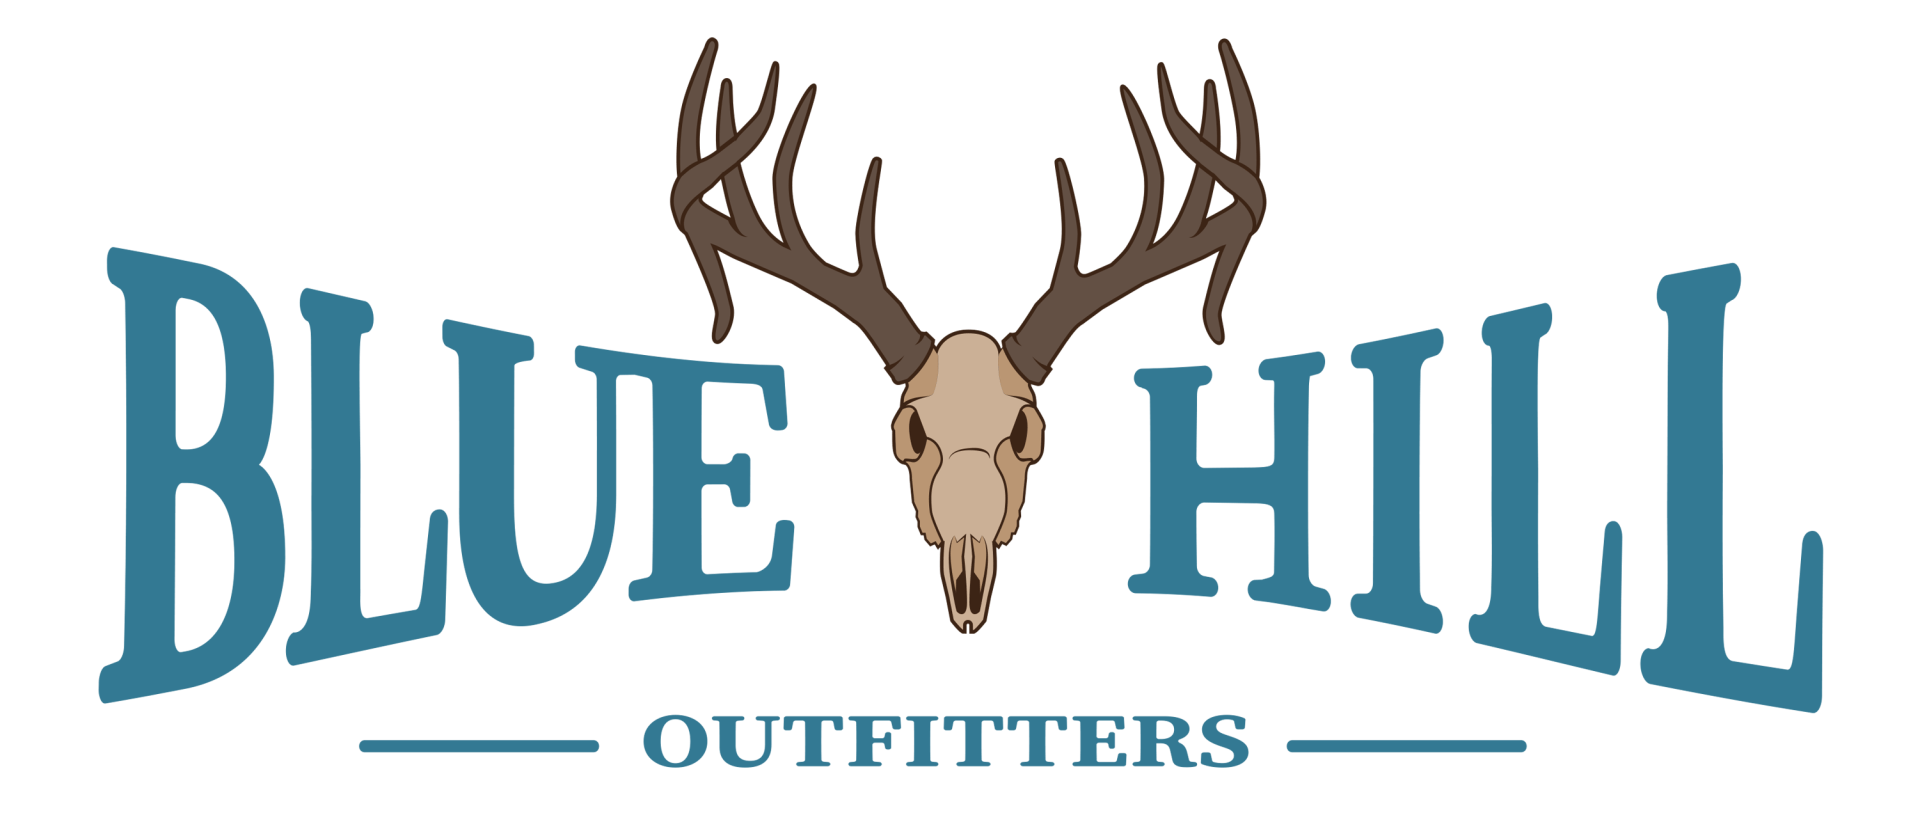 Blue Hill Outfitters Logo